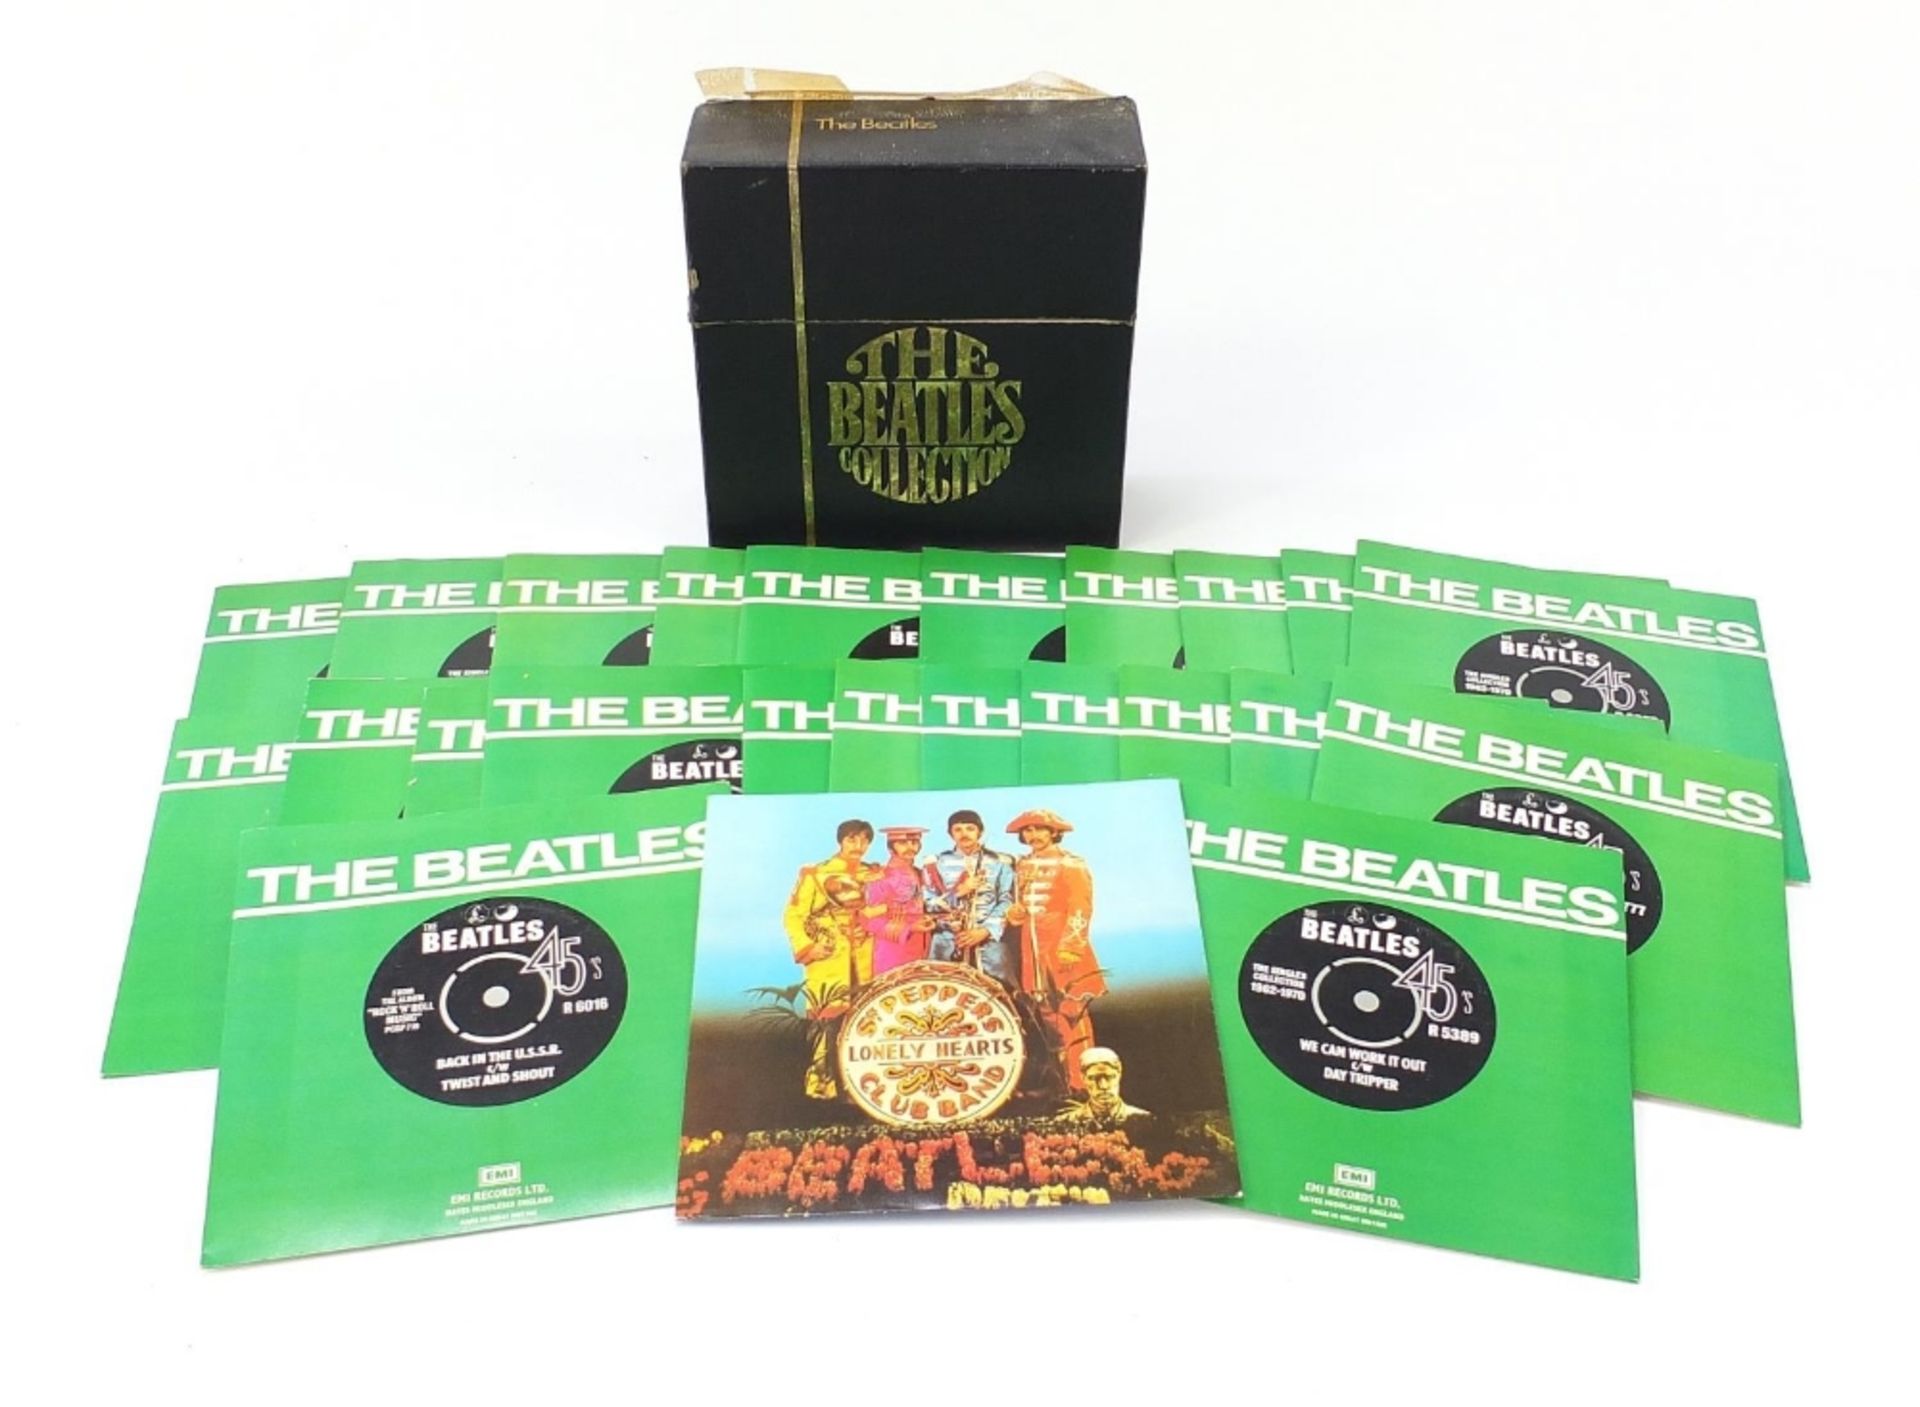 The Beatles Collection 45rmp box set :For Further Condition Reports Please Visit Our Website,